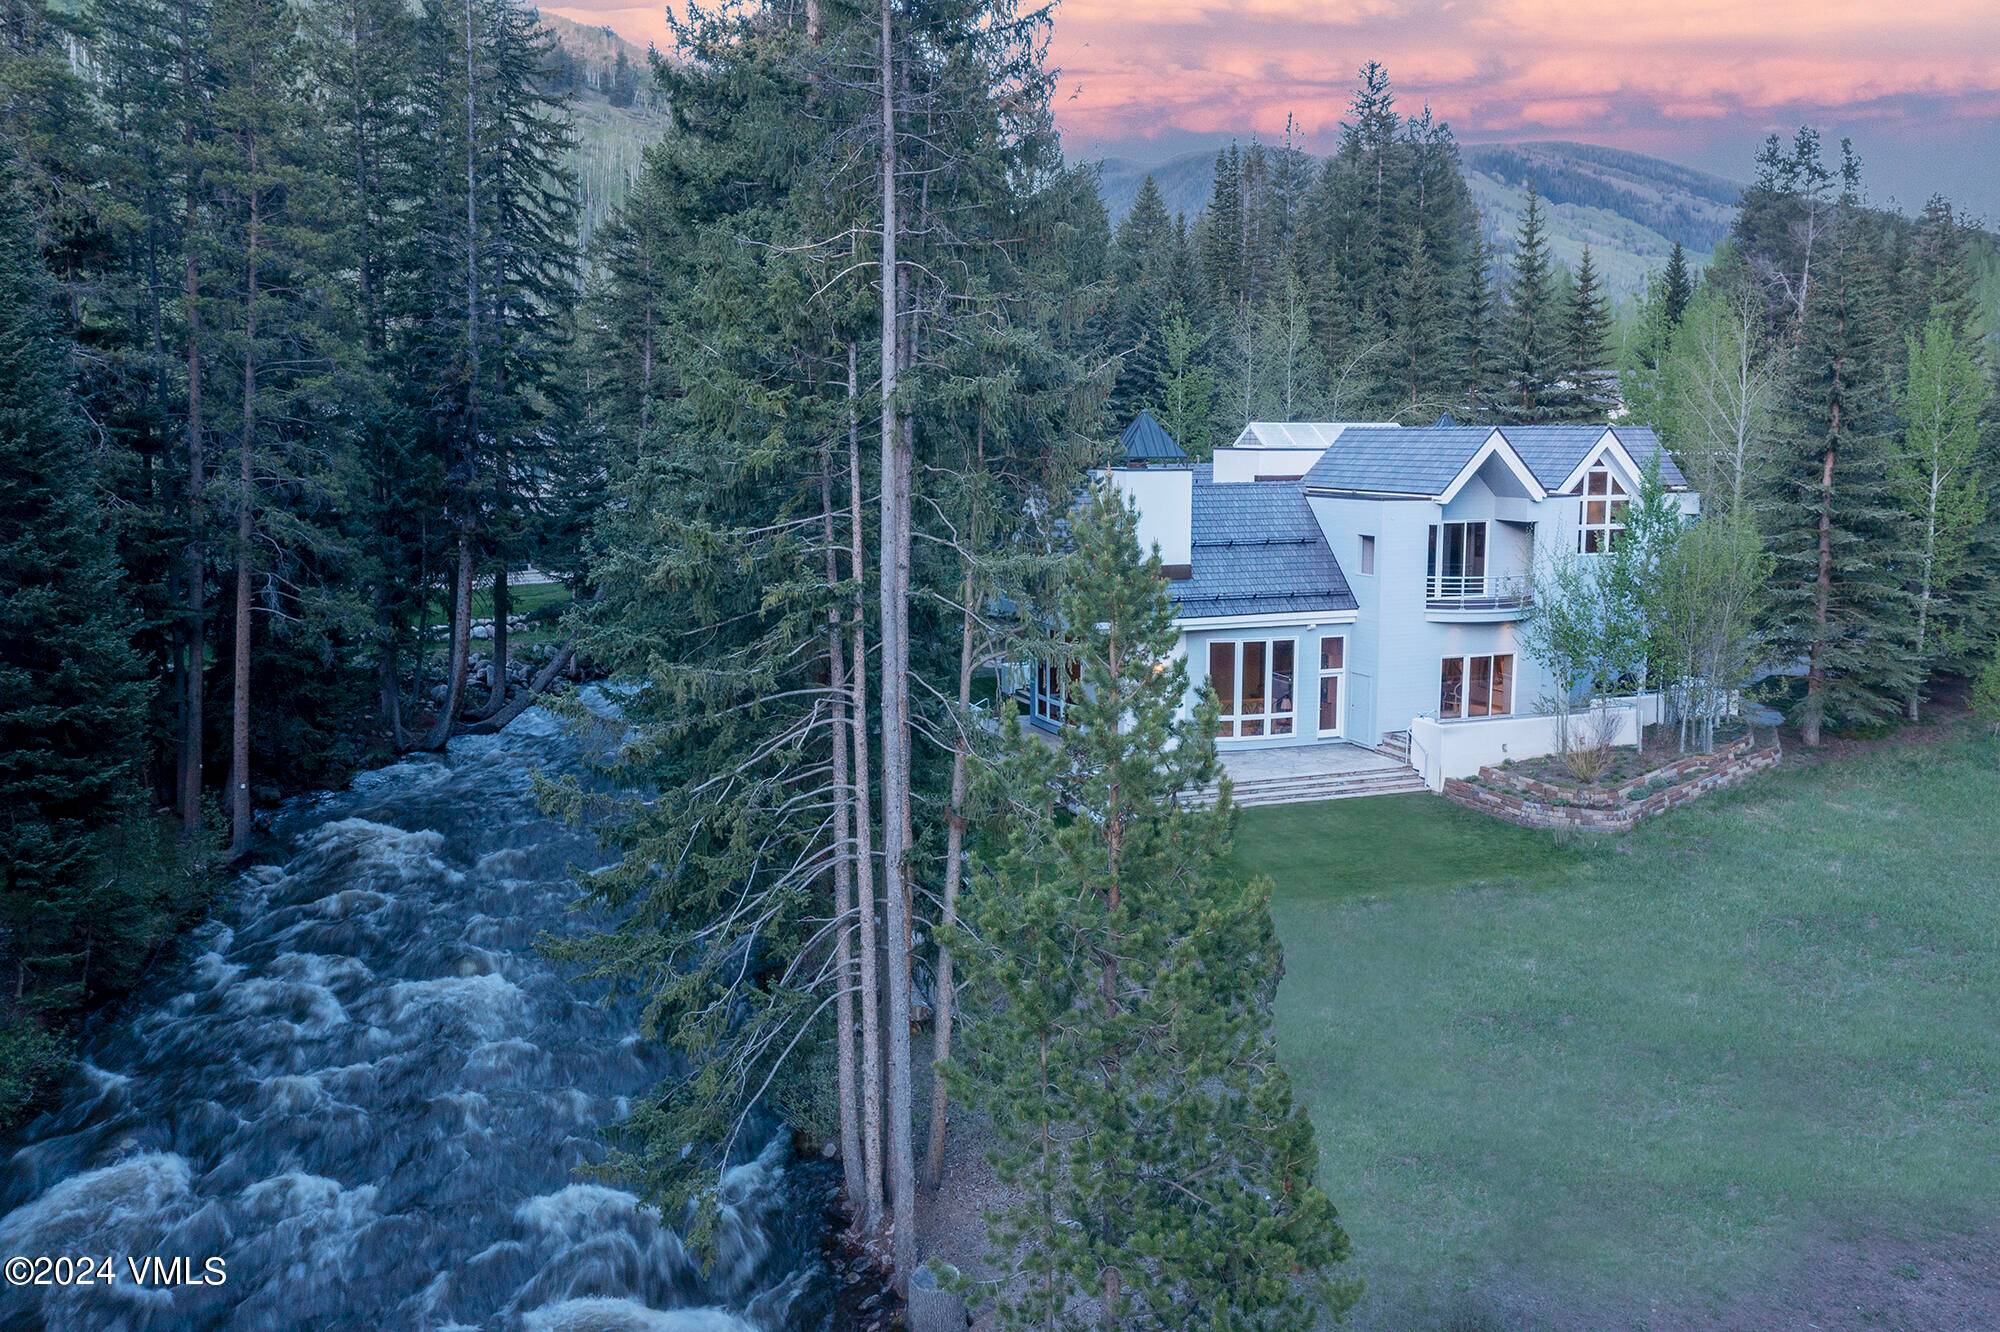 One of East Vail's most sought after locations, combining ease of access with picturesque surroundings.